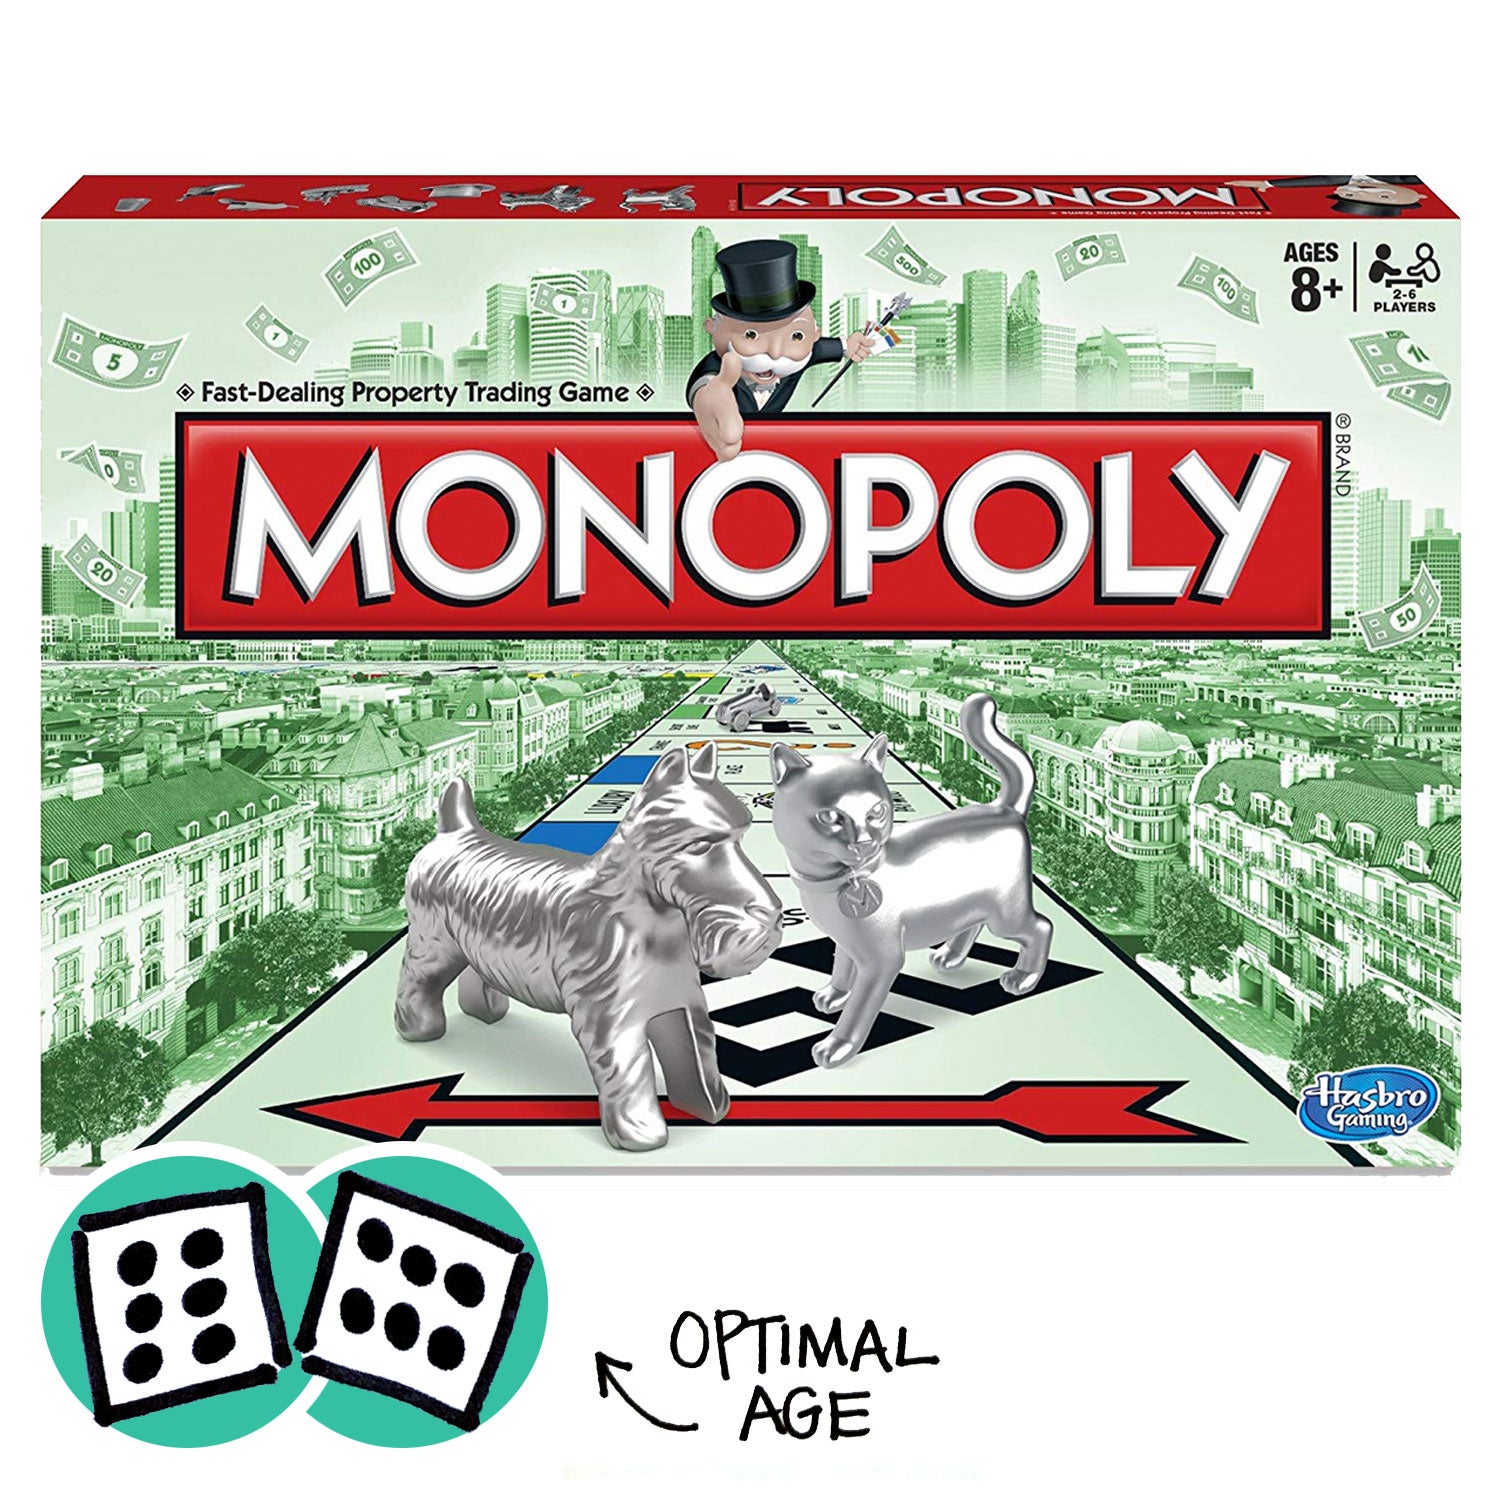 Monopoly with dice showing 12 as the optimal age for the game.